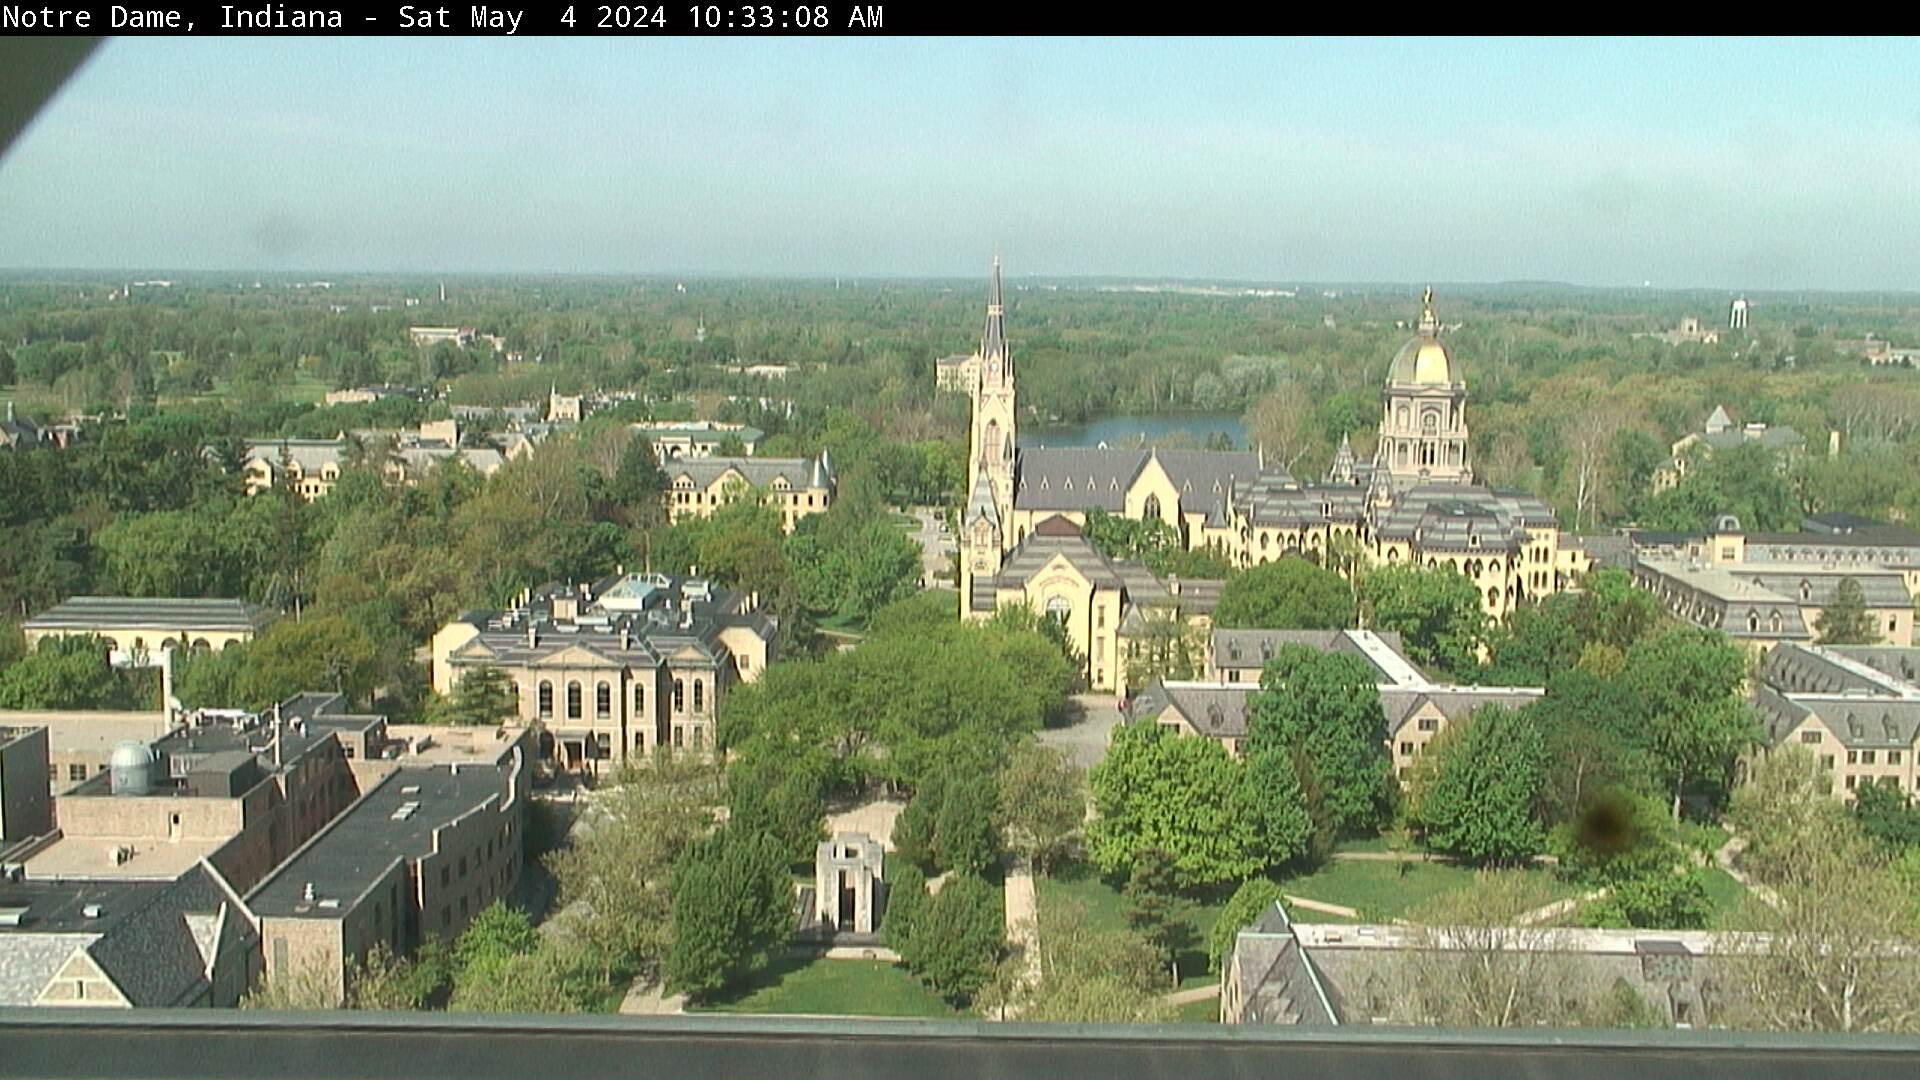 Plymouth: University of Notre Dame Traffic Camera